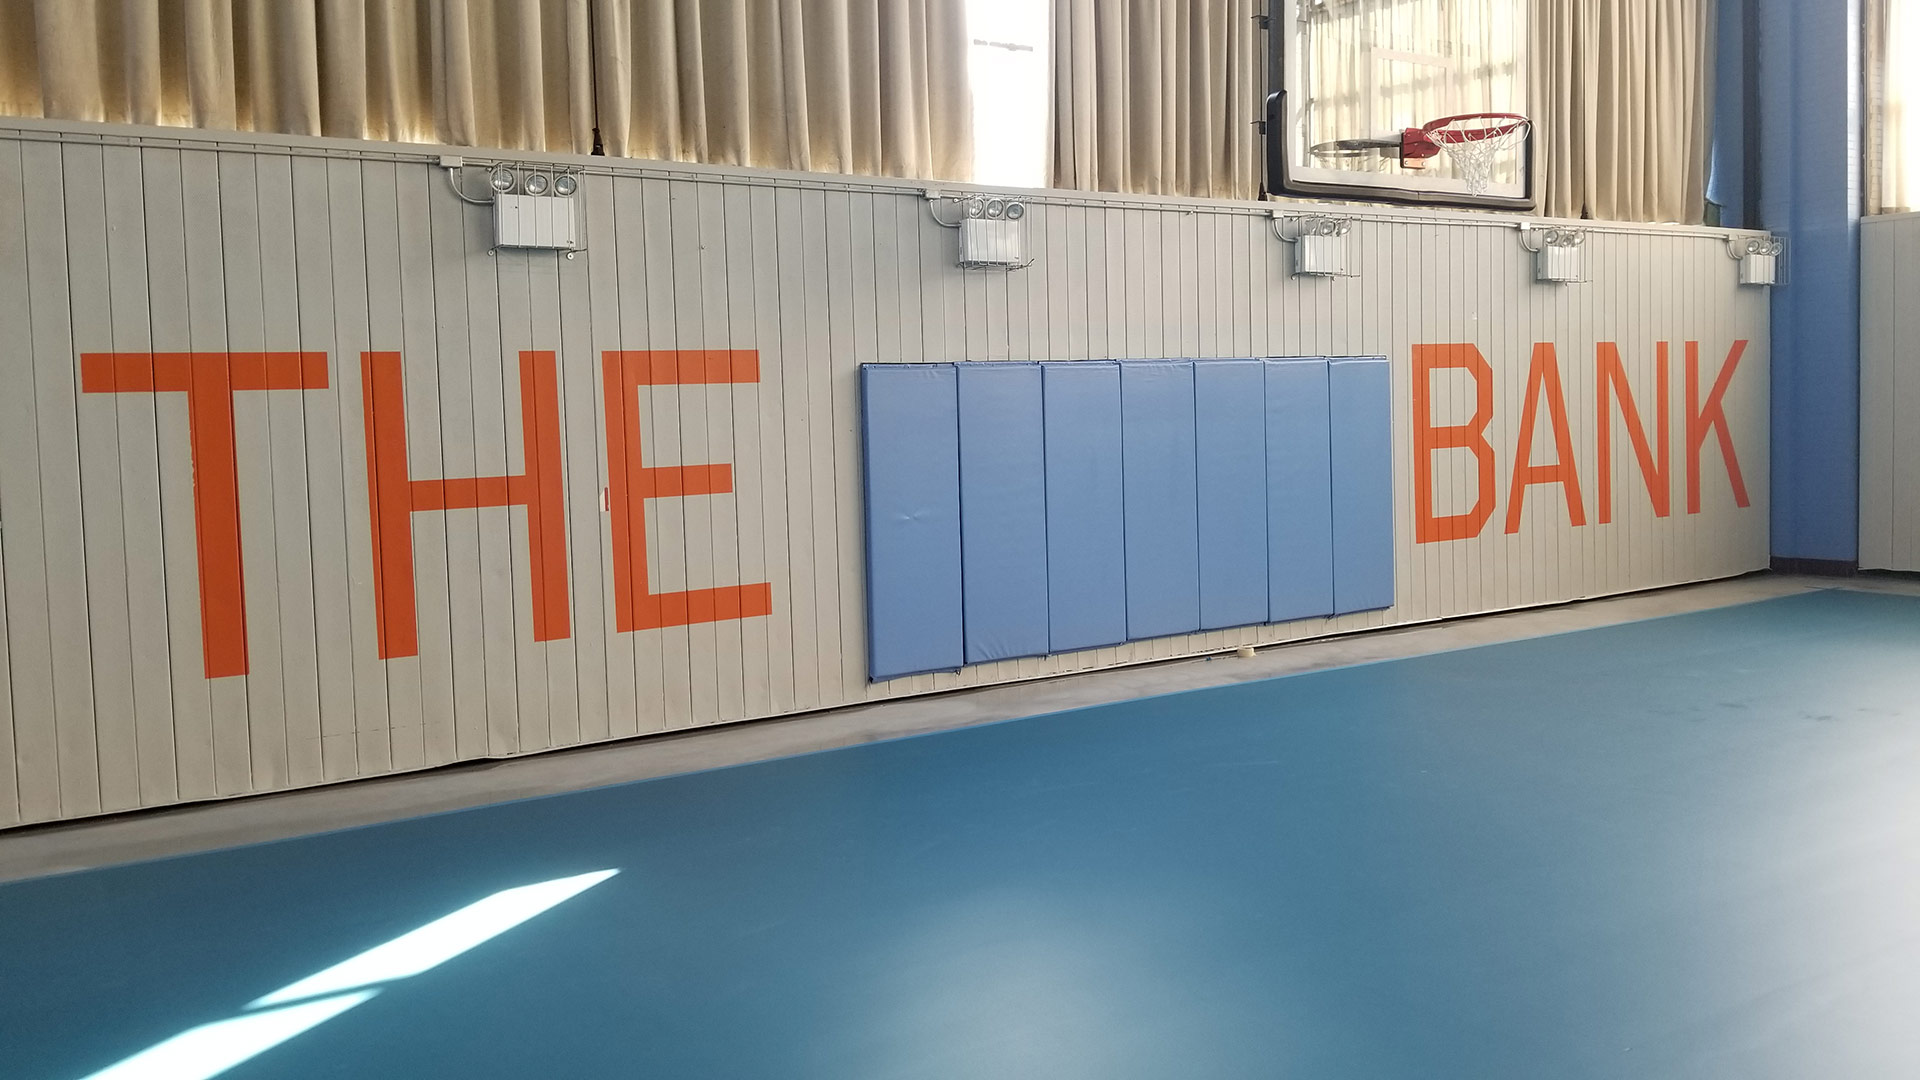 Indoor court at Dunlevy Milbank Center in New York, NY